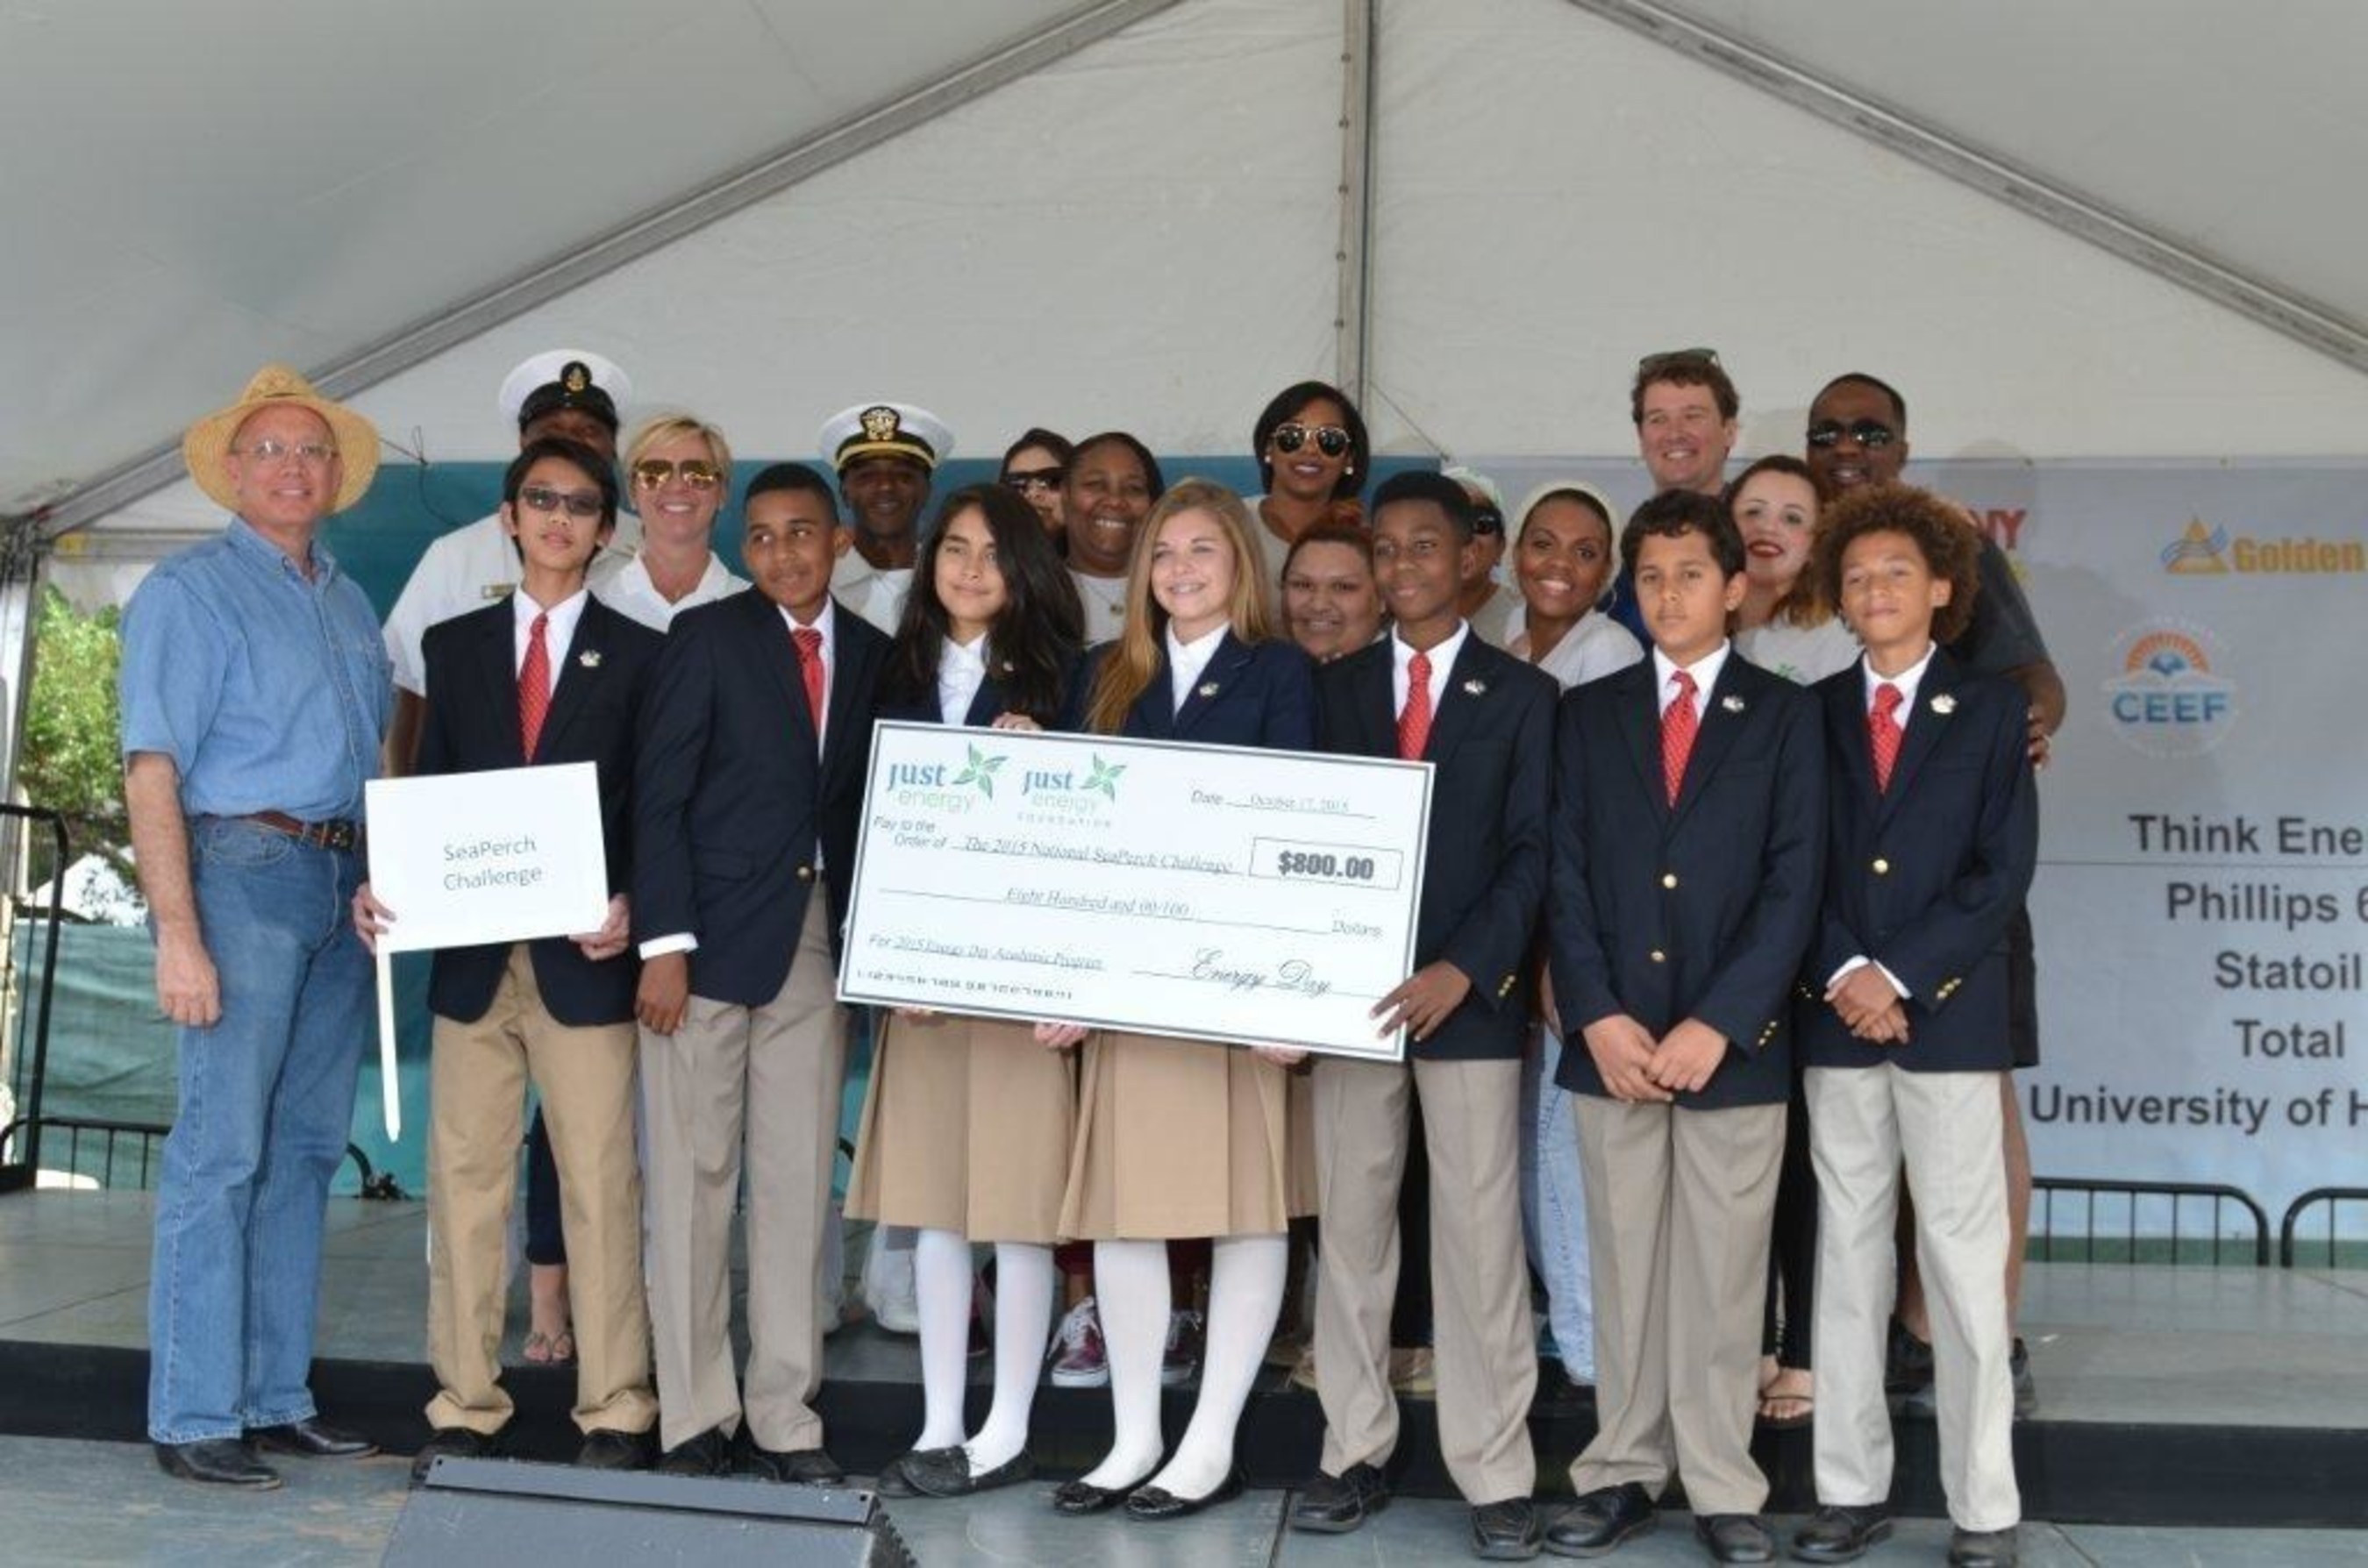 As a proud sponsor of the recent Energy Day Festival, the Just Energy Foundation was honored to present a financial award in support of the SeaPerch Challenge, an innovative underwater robotics competition that equips teachers and students with the resources they need to build an underwater Remotely Operated Vehicle (ROV). Presented by Deb Merril and James Lewis, Co-CEOs at Just Energy (pictured back row), the award went to top-placing students for their achievements in...